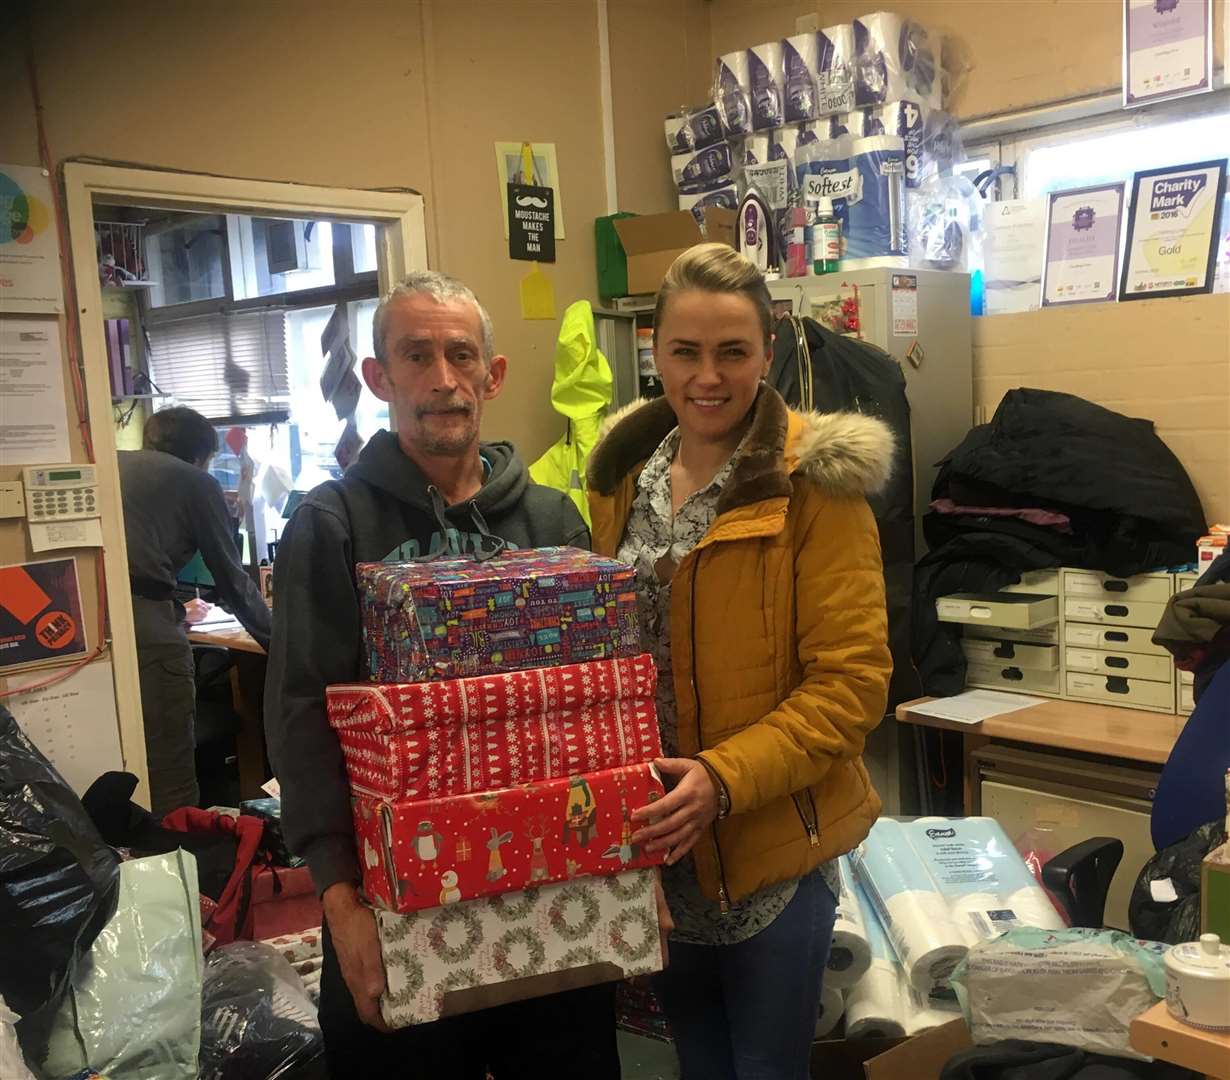 Jaymie Dunster traditionally delivers the boxes to the homeless shelter in Canterbury on Christmas Eve